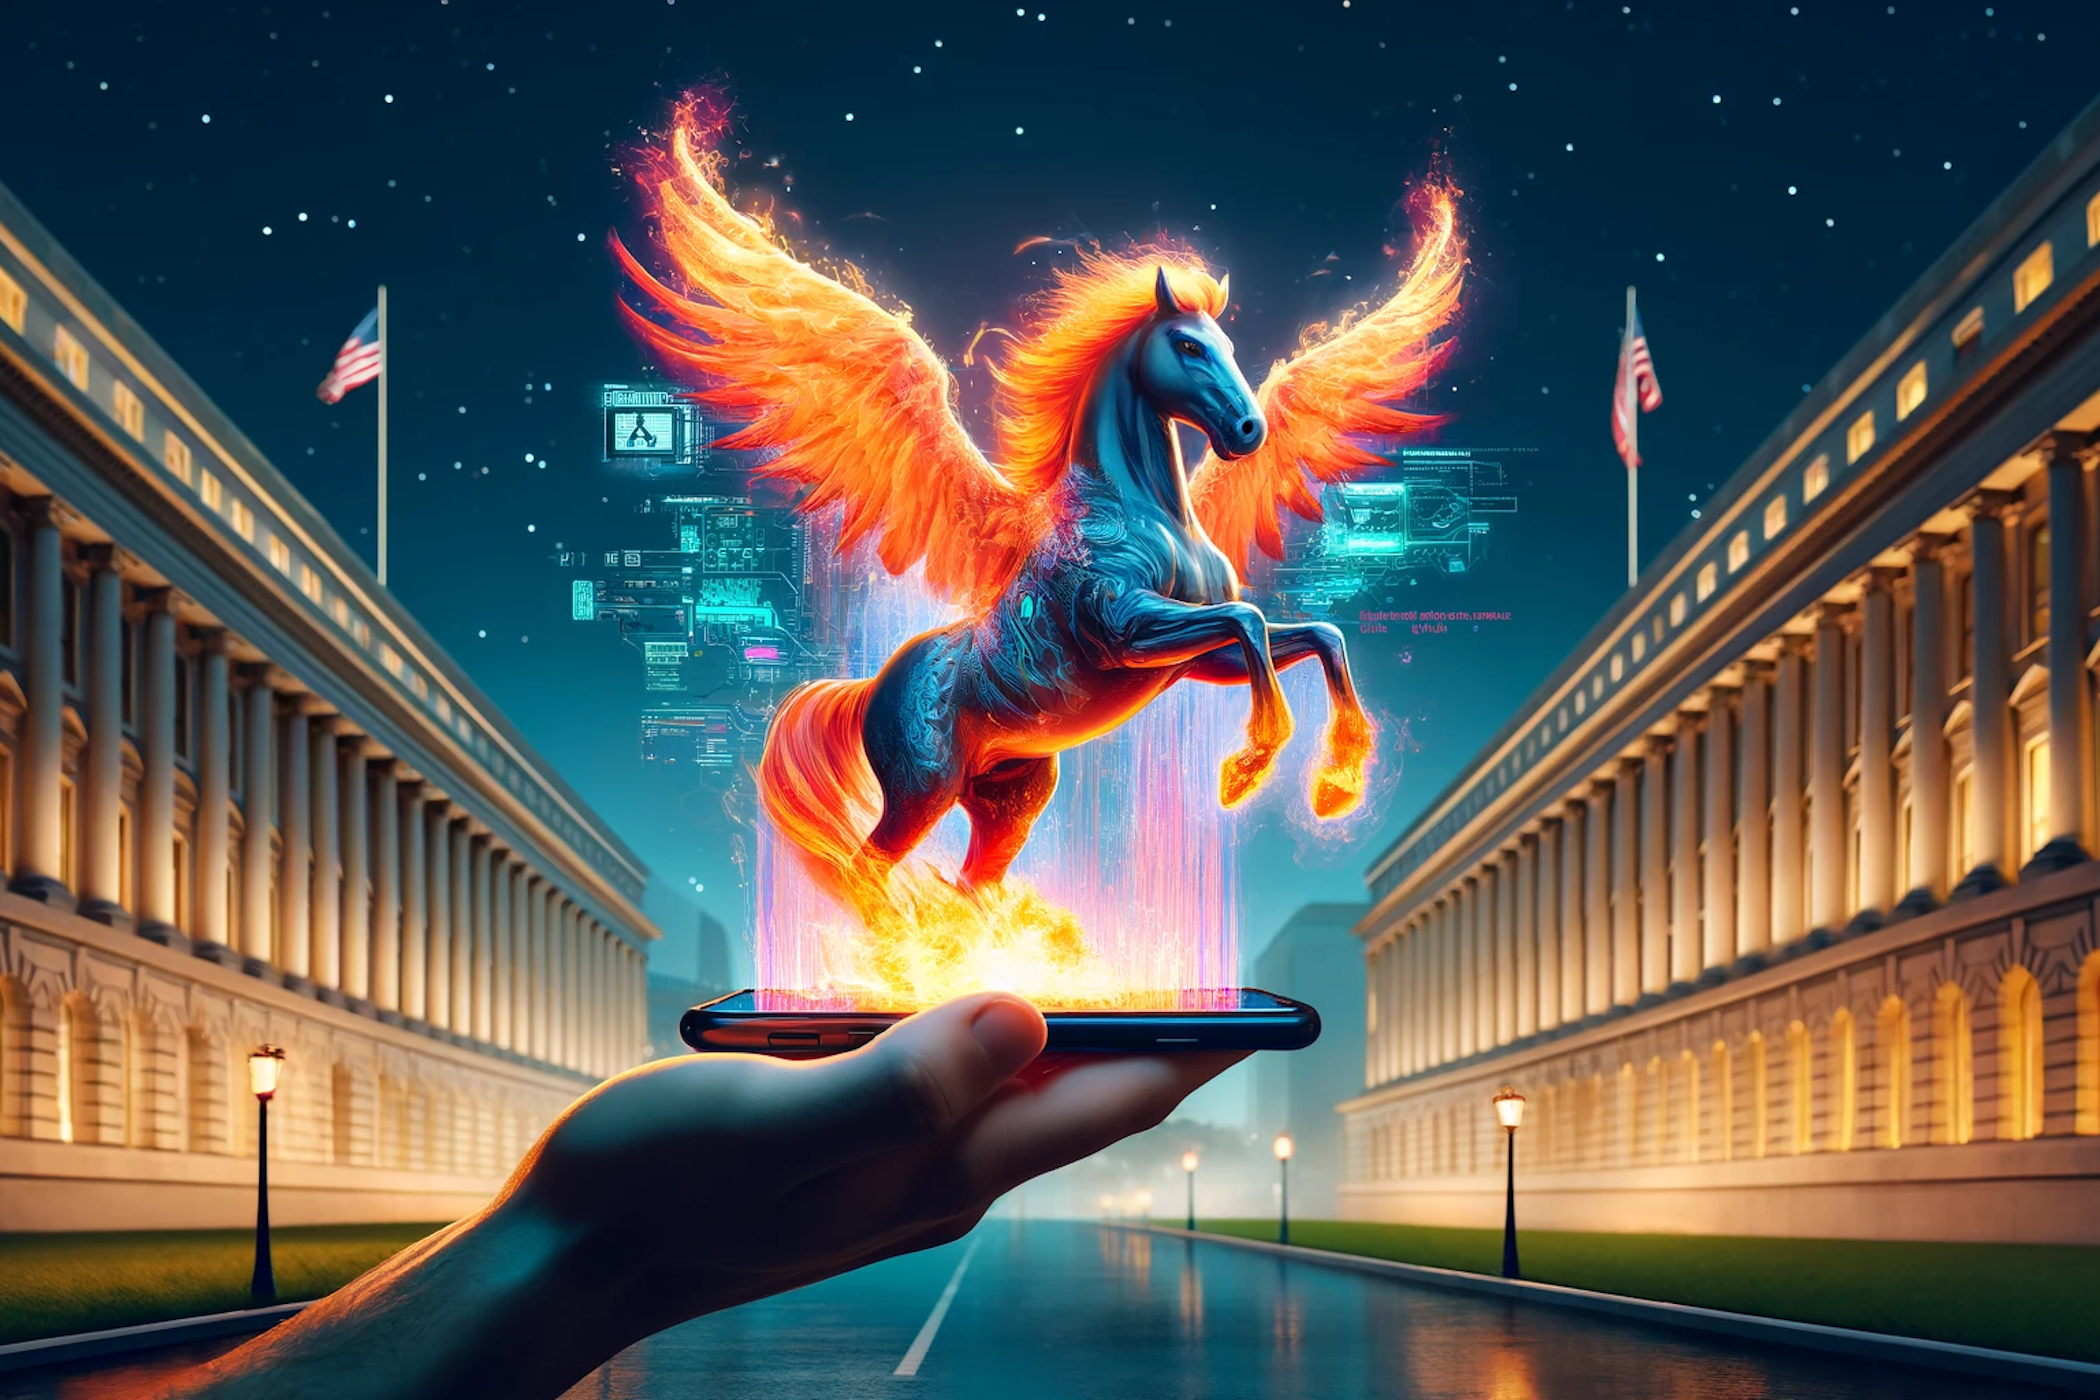 pegasus malware coming out of smartphone american flags background illustration